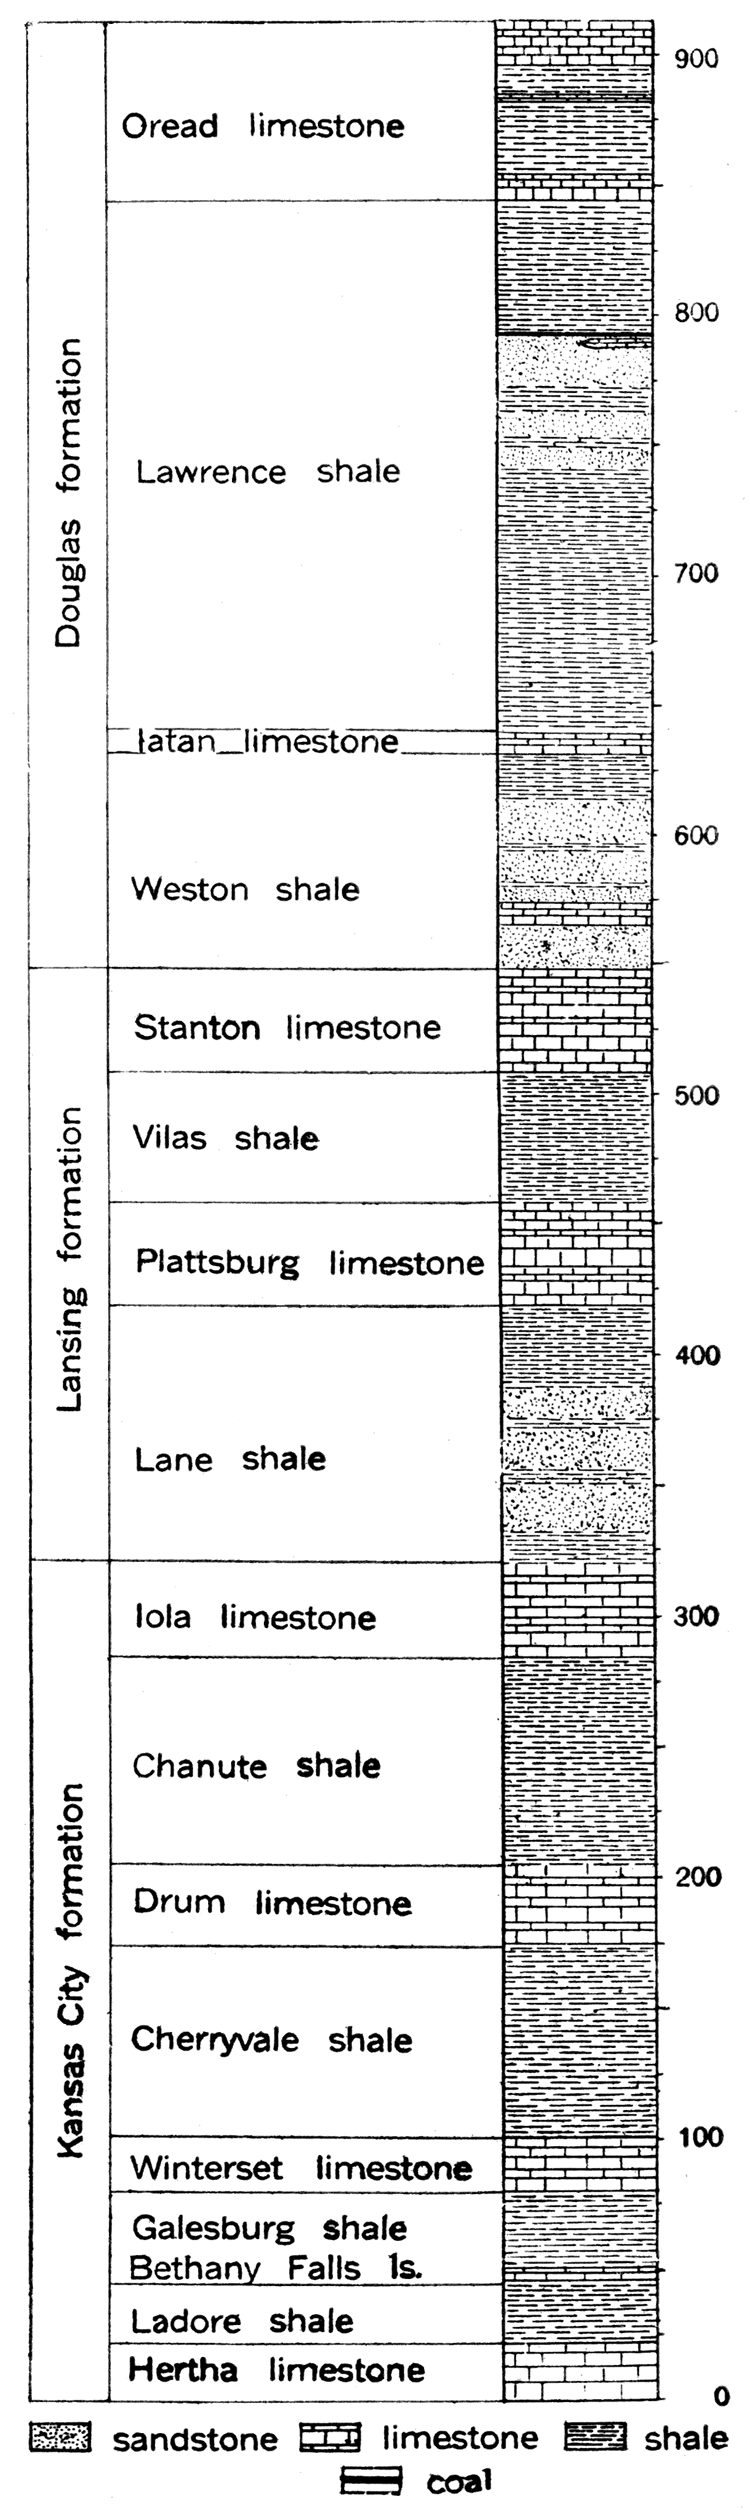 Generalized section of the Kansas City, Lansing, and Douglas formations of the Missouri group of the Pennsylvanian in Kansas.